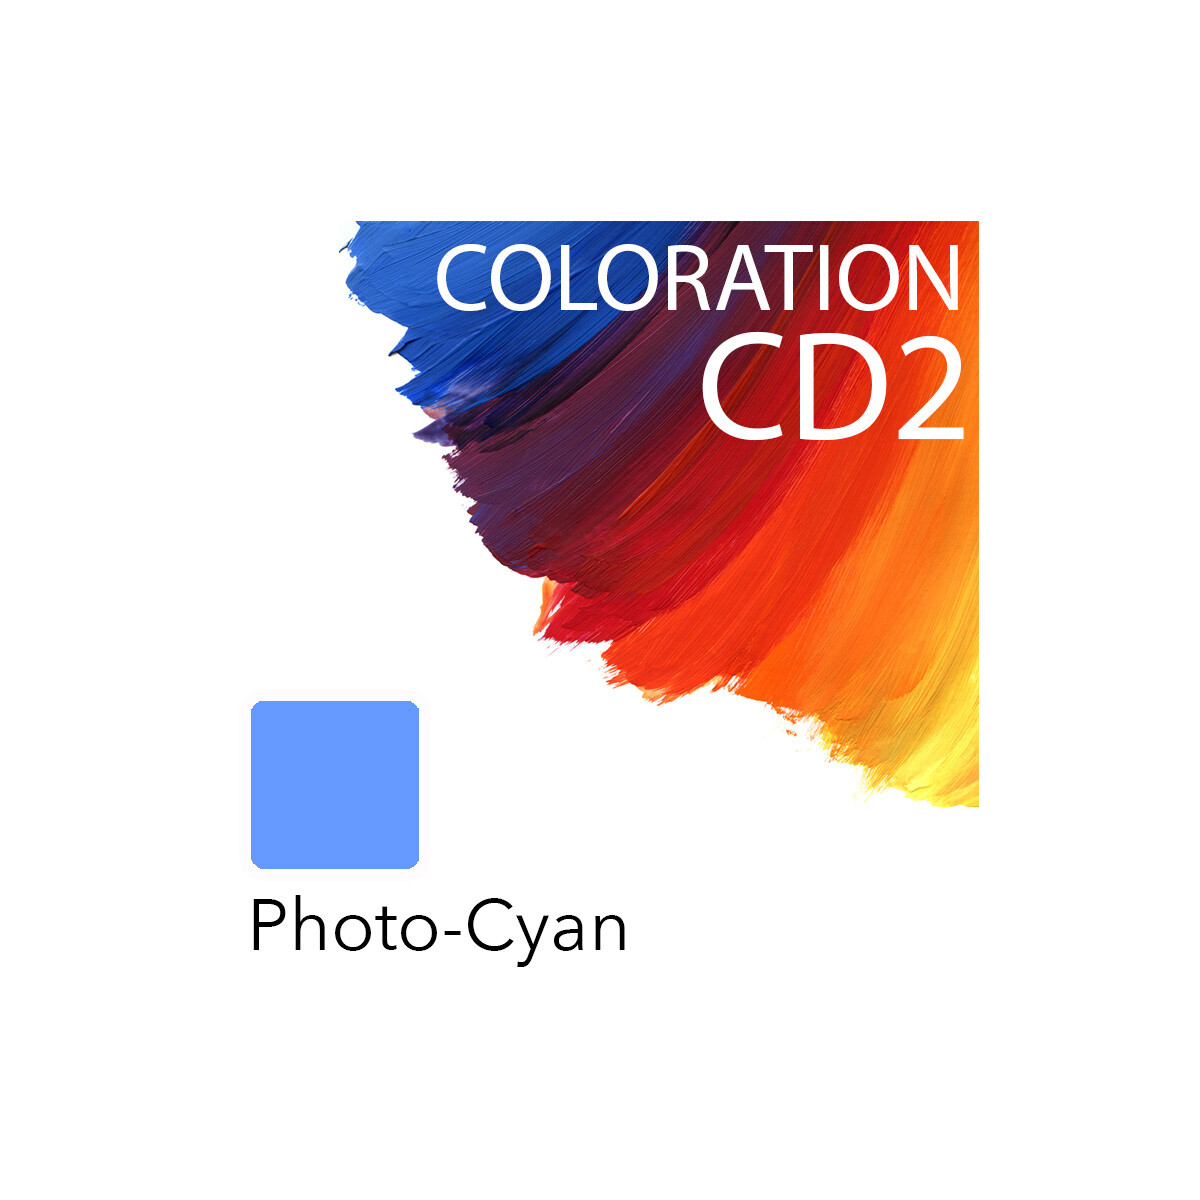 Coloration CD2 Flasche Photo-Cyan